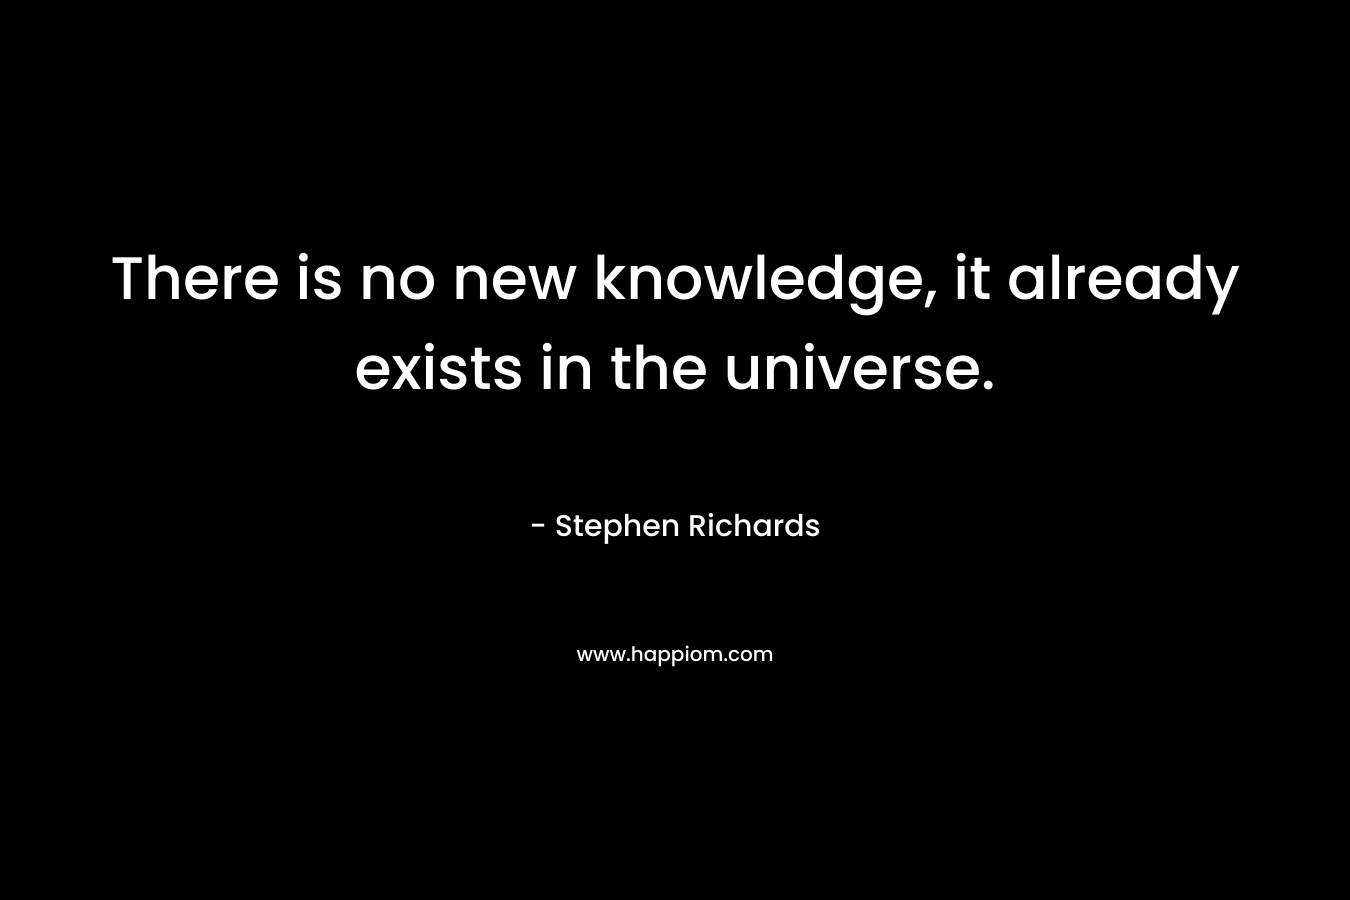 There is no new knowledge, it already exists in the universe.